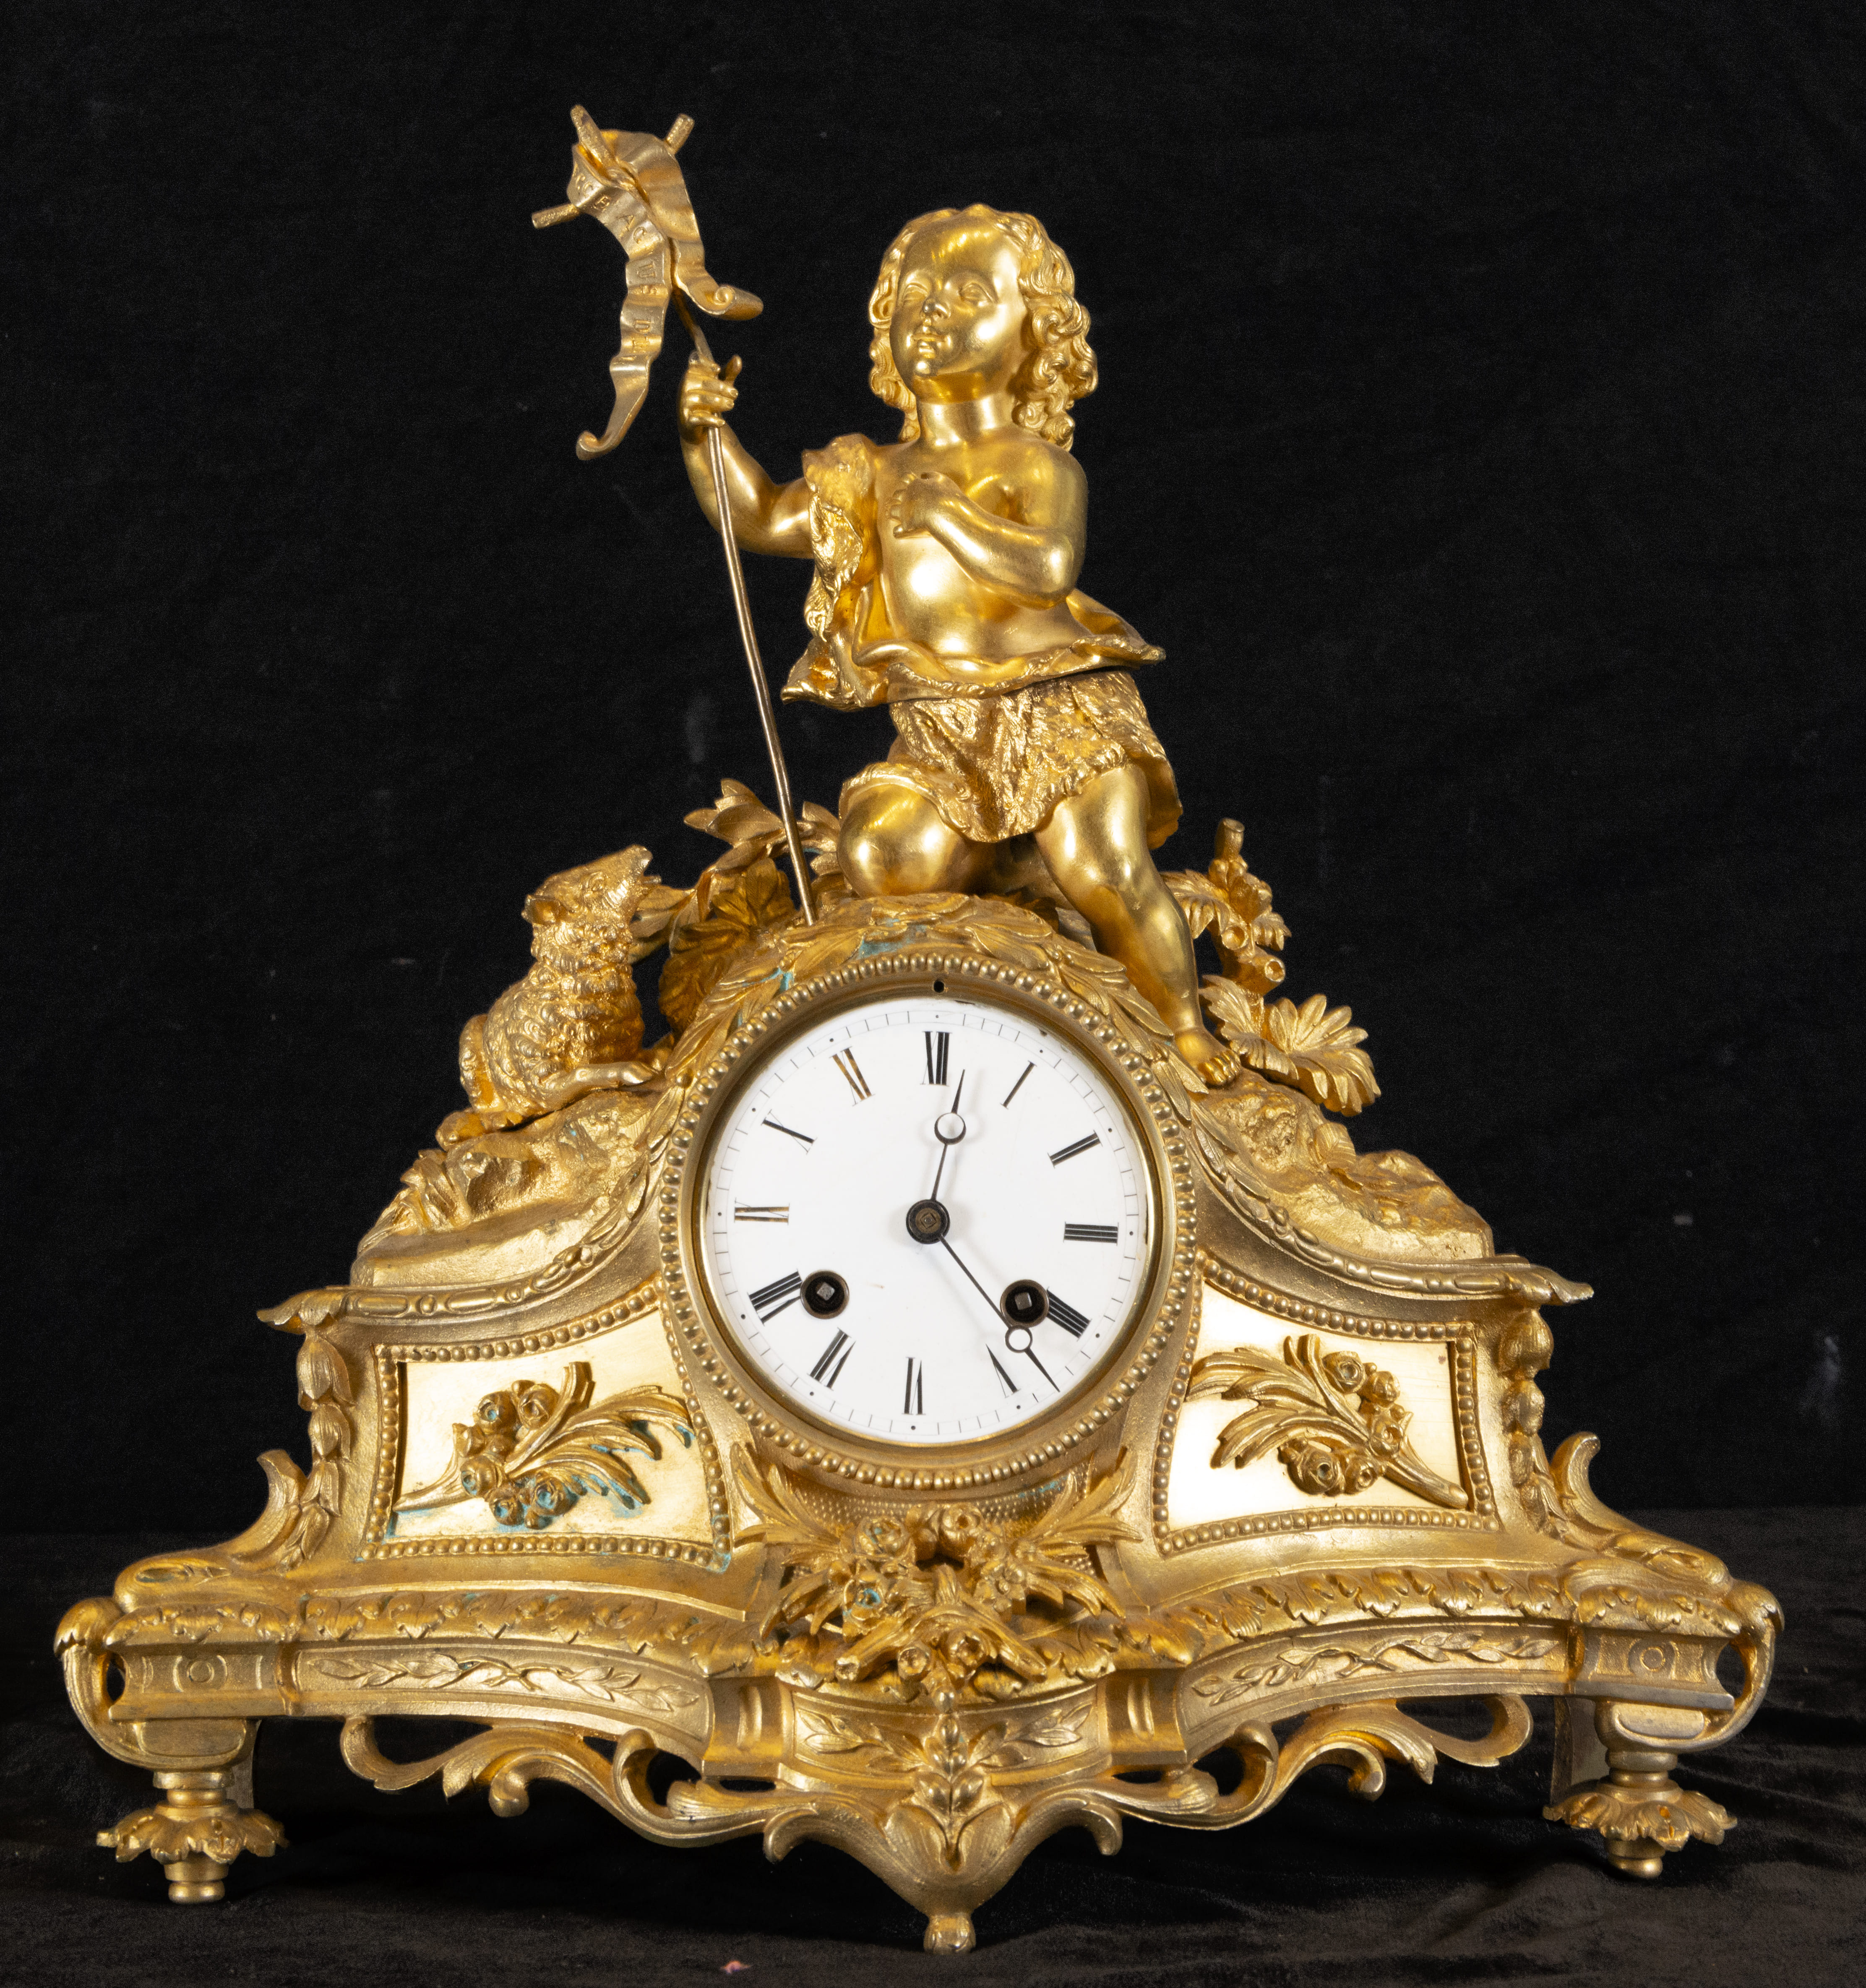 Complete French garrison in mercury gilt bronze in Louis XV style, 19th century French work - Image 4 of 7